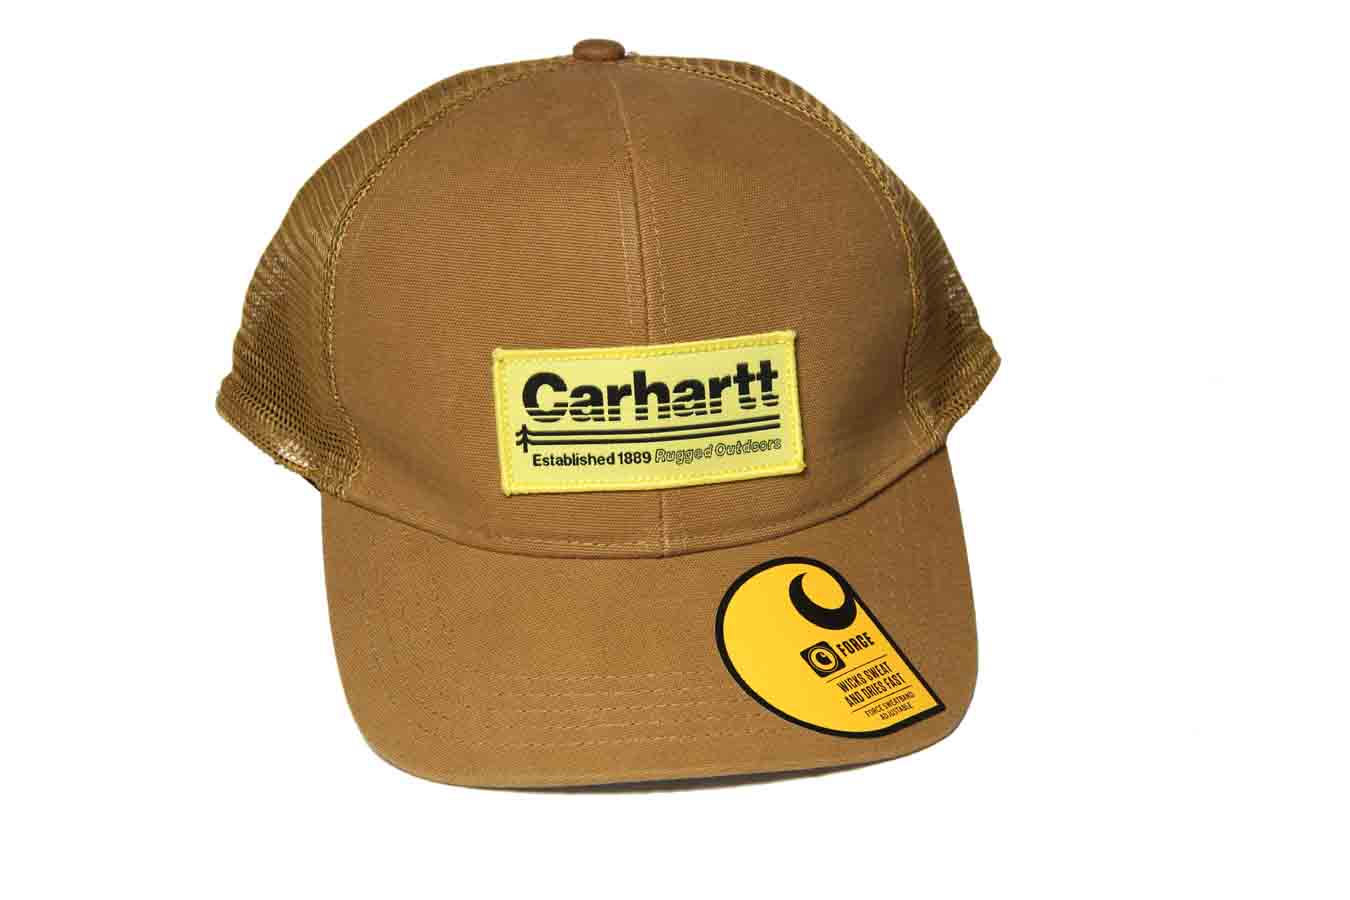 Carhatt Cotton Canvas and Mesh Outdoors Cap / Hat Brown Men's OS Adjustable